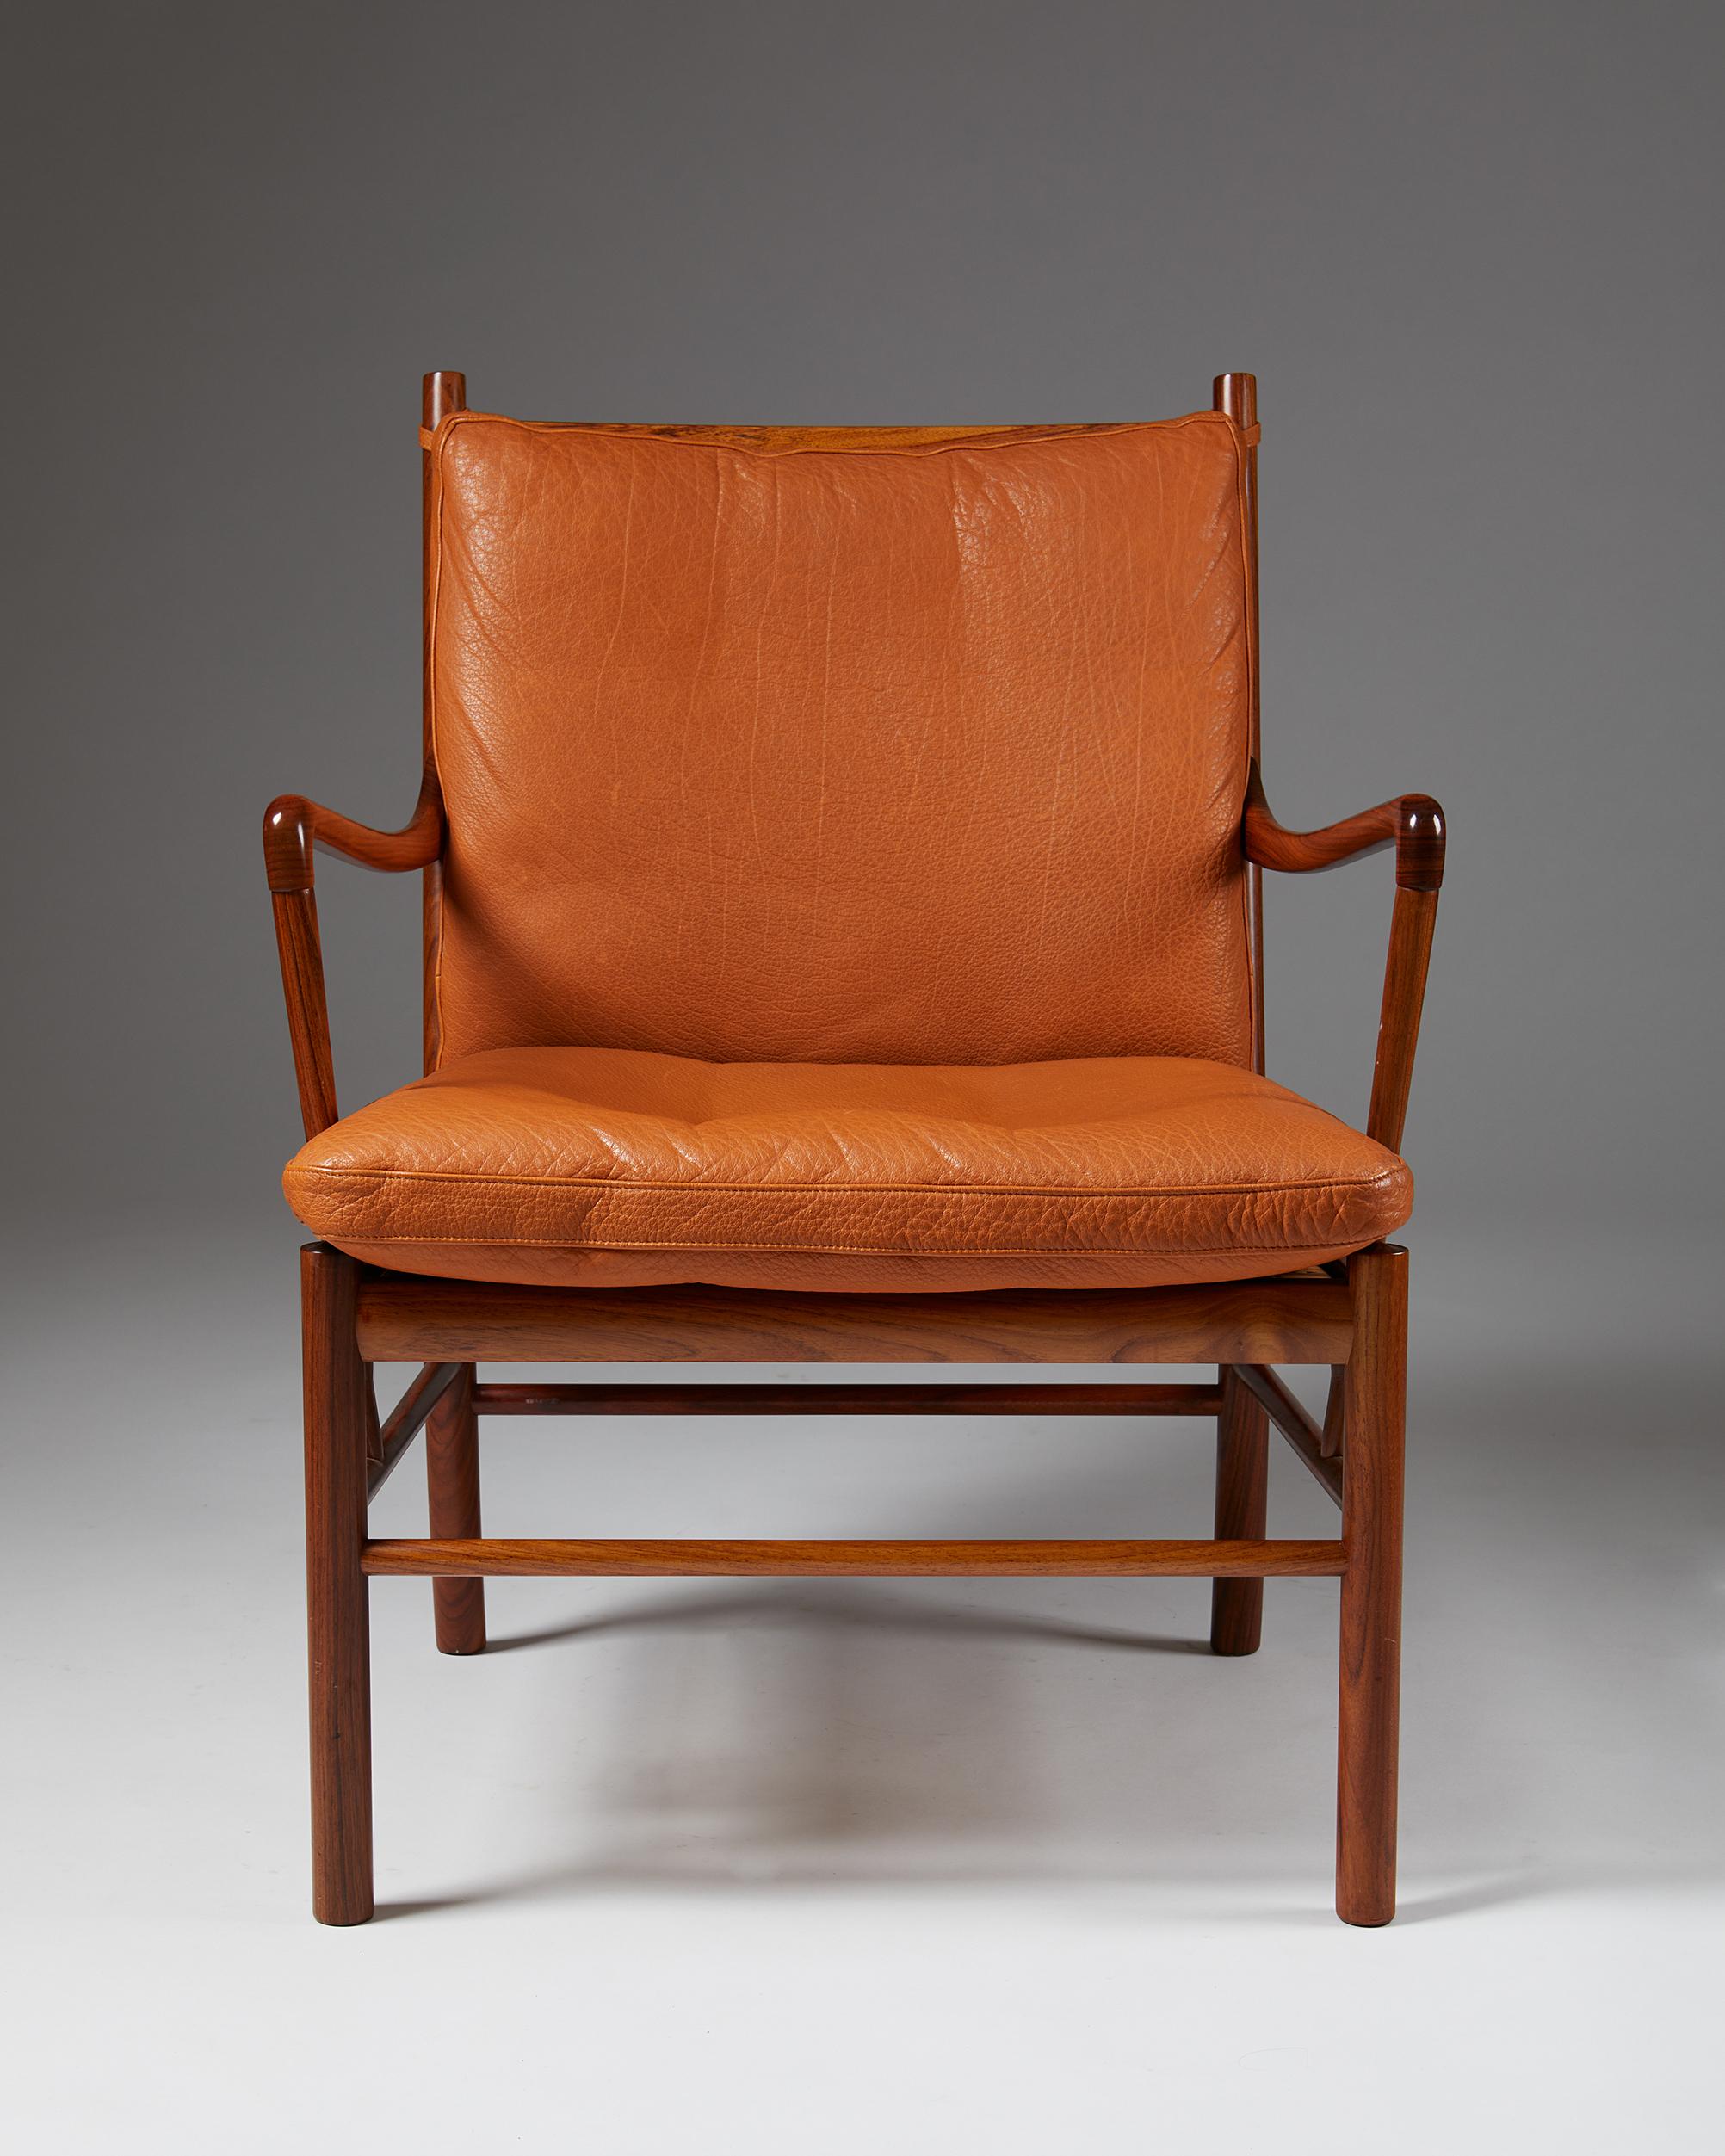 Danish Colonial Chair Designed by Ole Wanscher, Manufactured by P Jeppesen